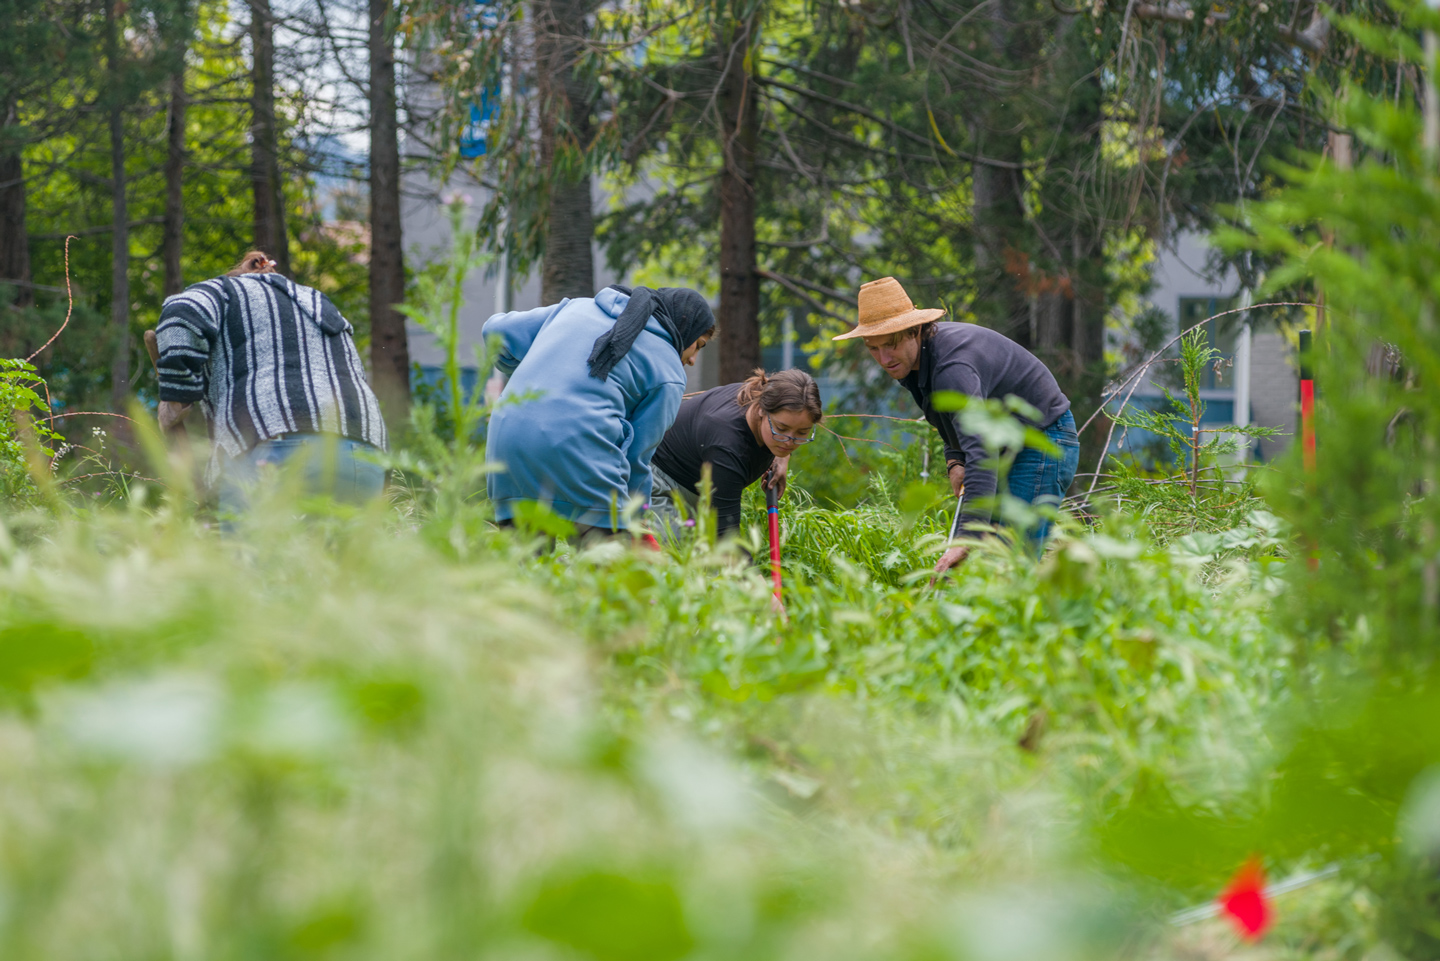 A group of people dig holes in an overgrown patch of green grasses.